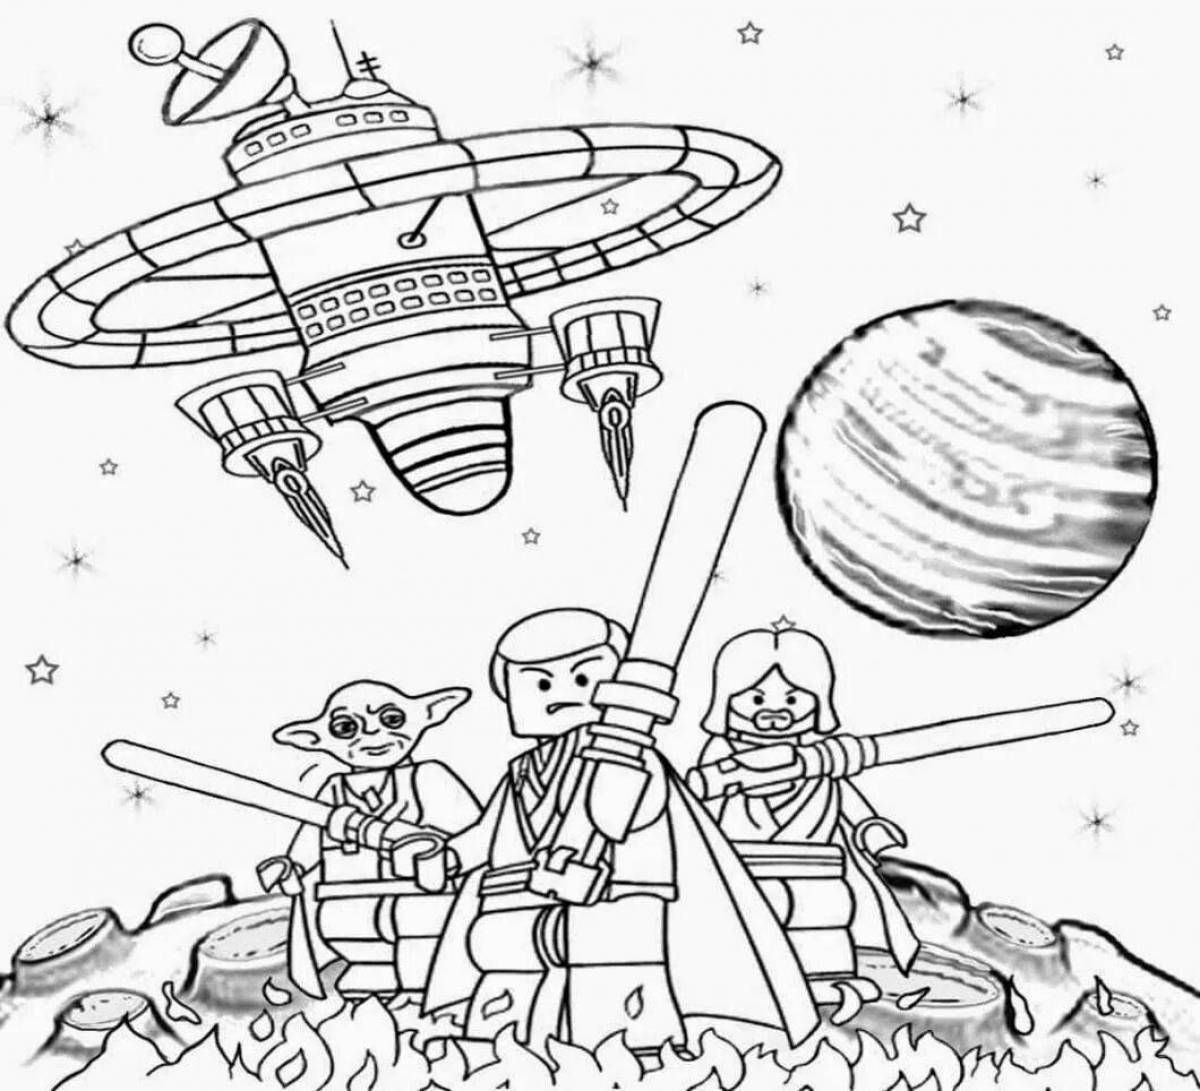 Outstanding star wars coloring book for boys